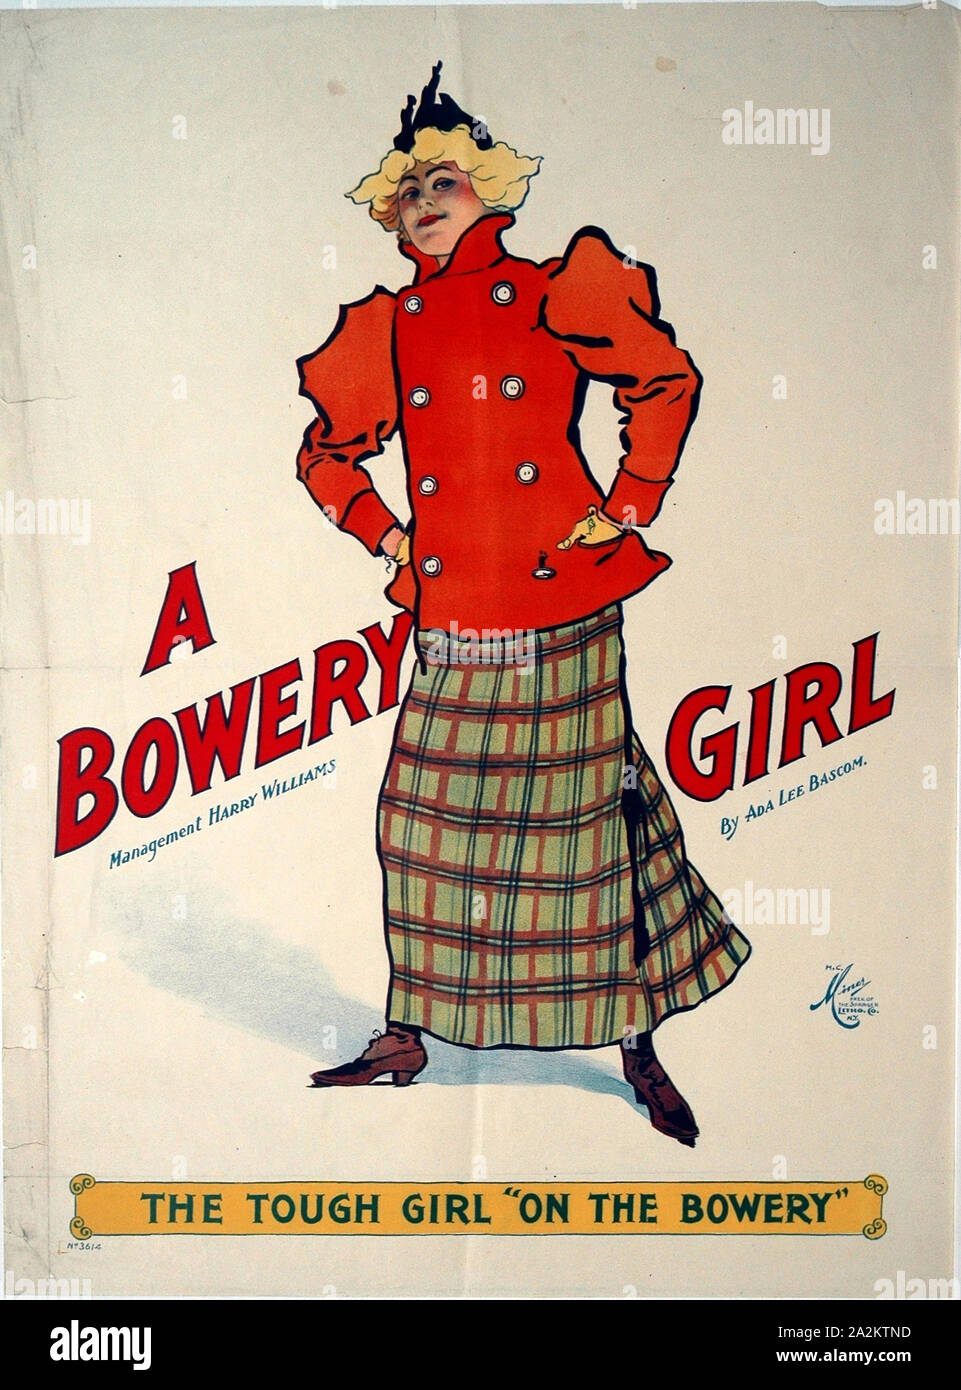 A Bowery Girl, c. 1895, Unknown Artist, printed by H.C. Miner, president of Springer Litho. Co., United States, Color lithograph on cream wove paper, 715 x 530 mm Stock Photo